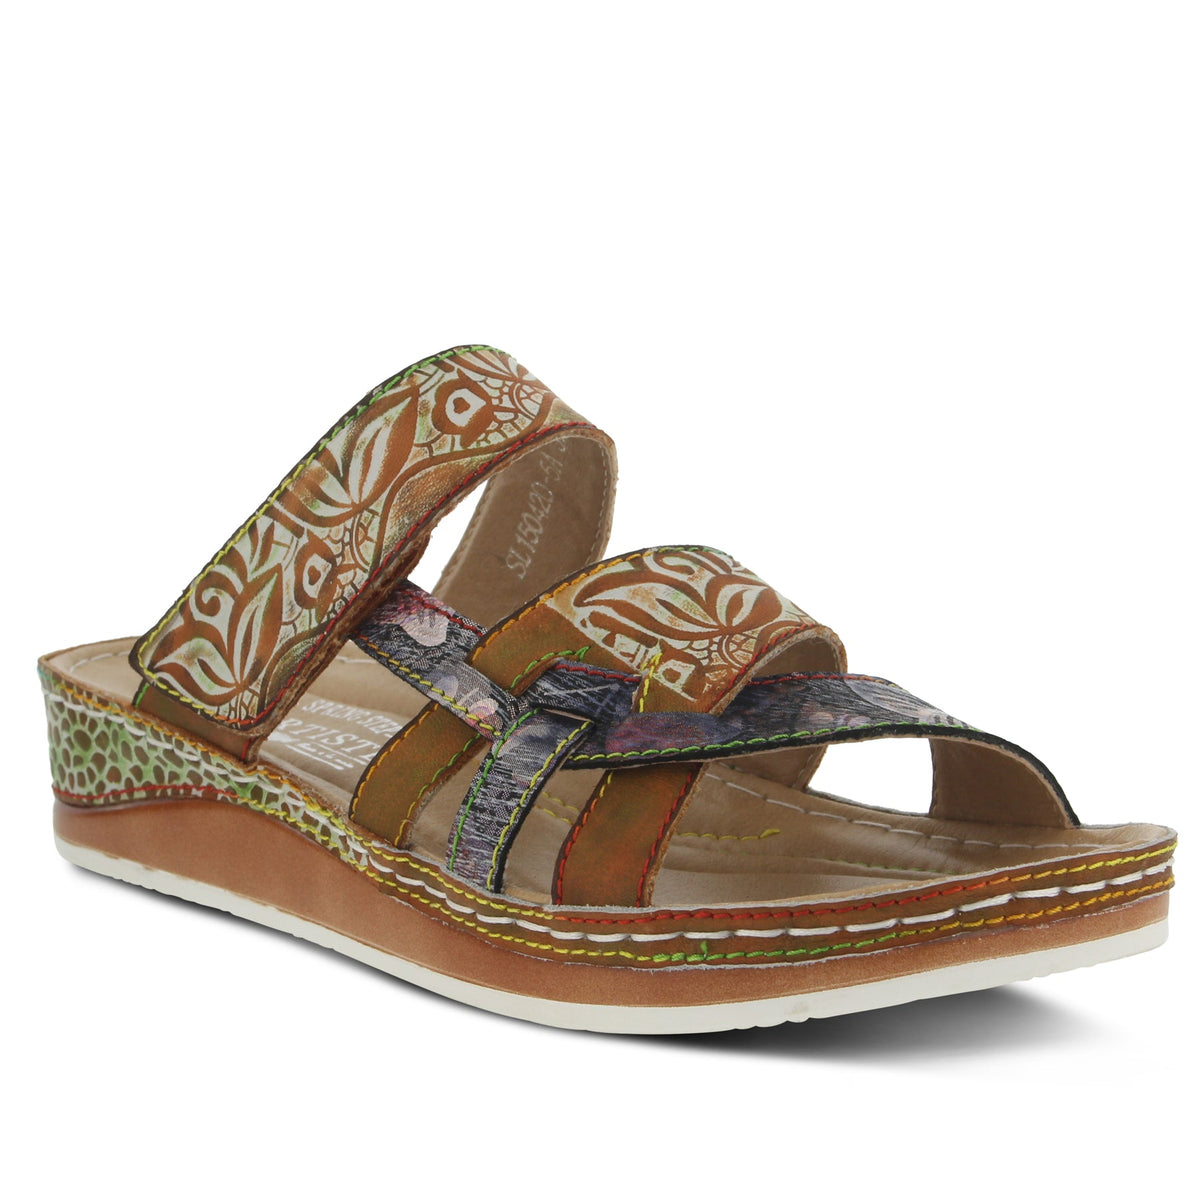 Camel Brown Tan Multi Colored Floral Leather Womens Slide Sandal Rainbow Contrast Stitching French European Shoe